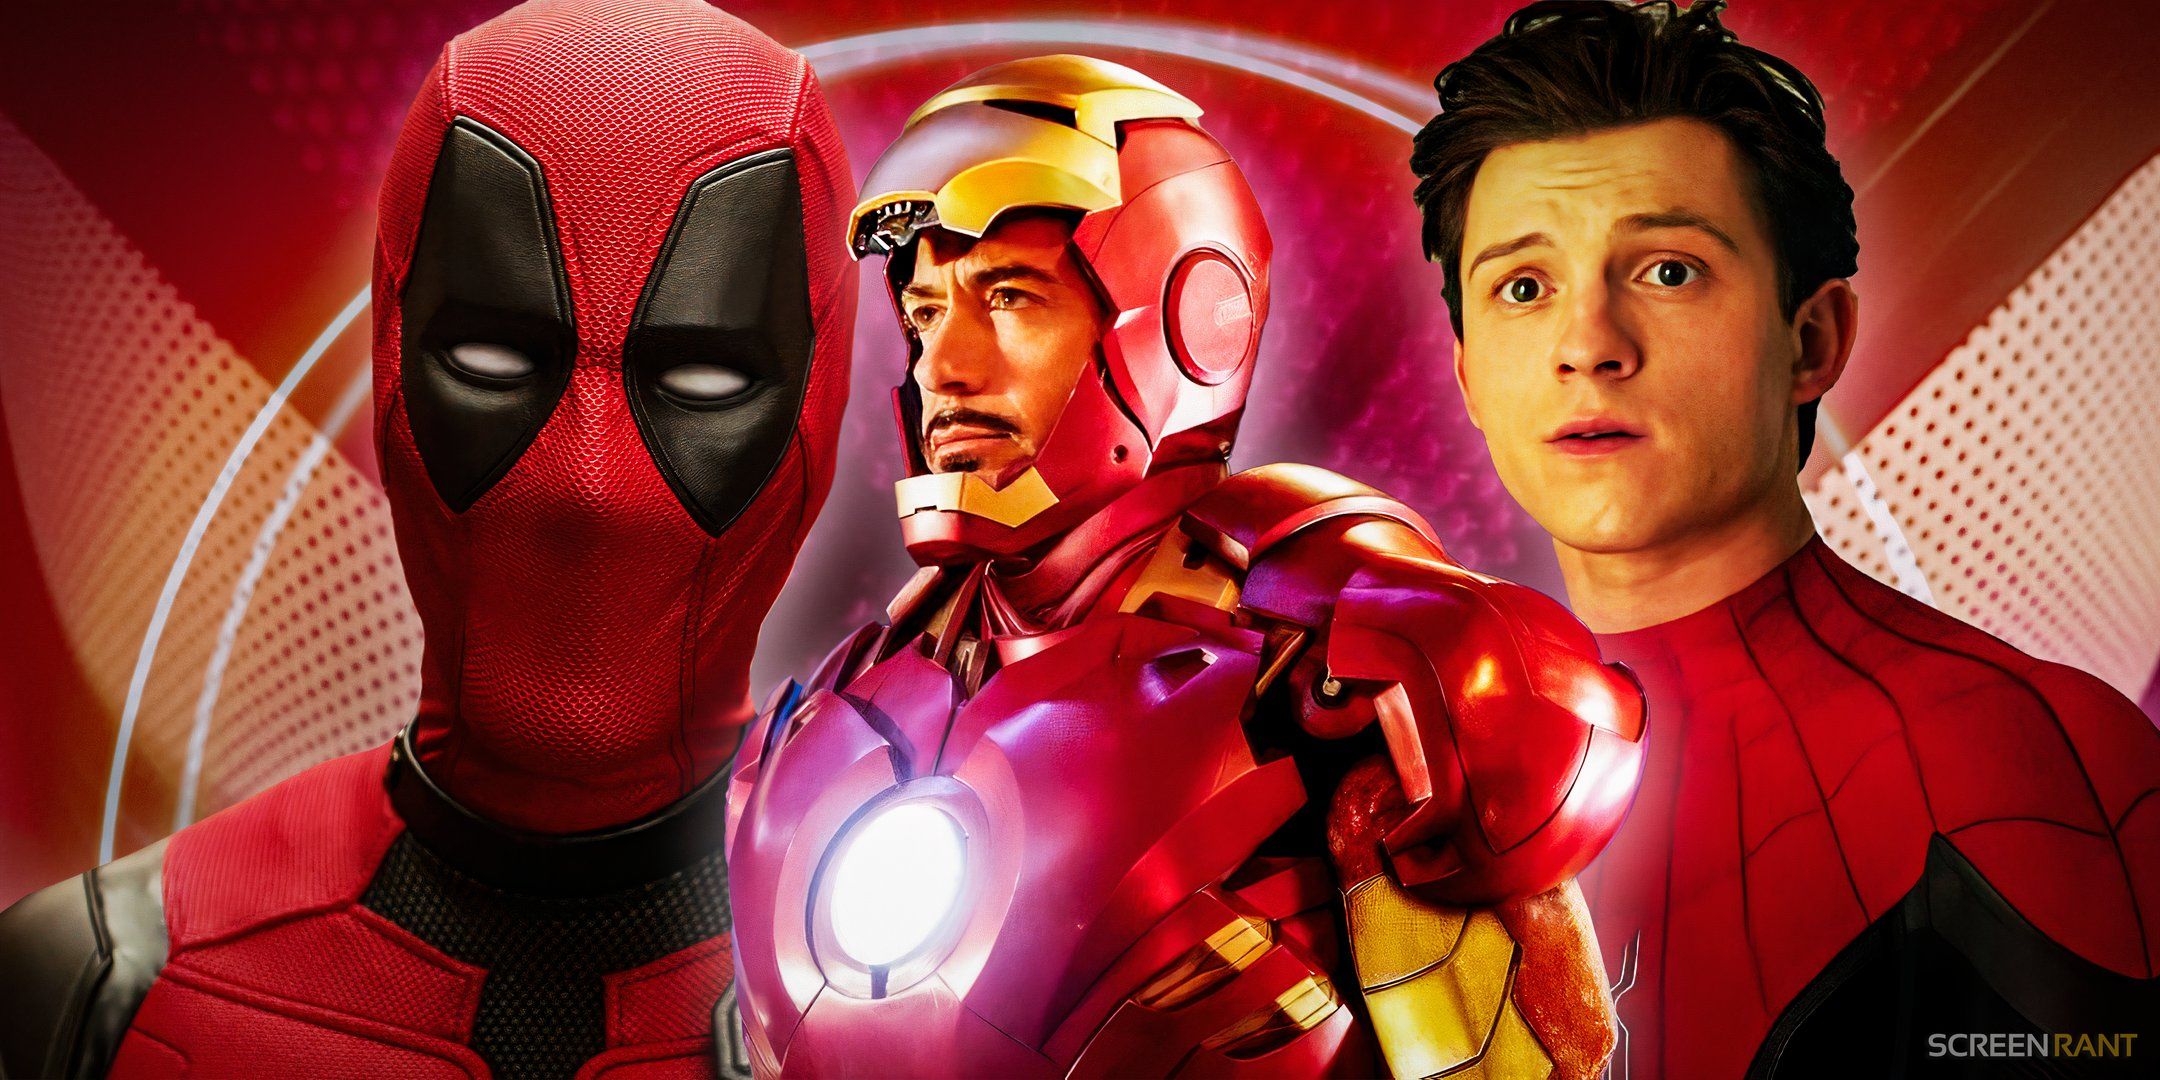 Iron Man, Deadpool, and Spider-Man from the MCU with a red and white background